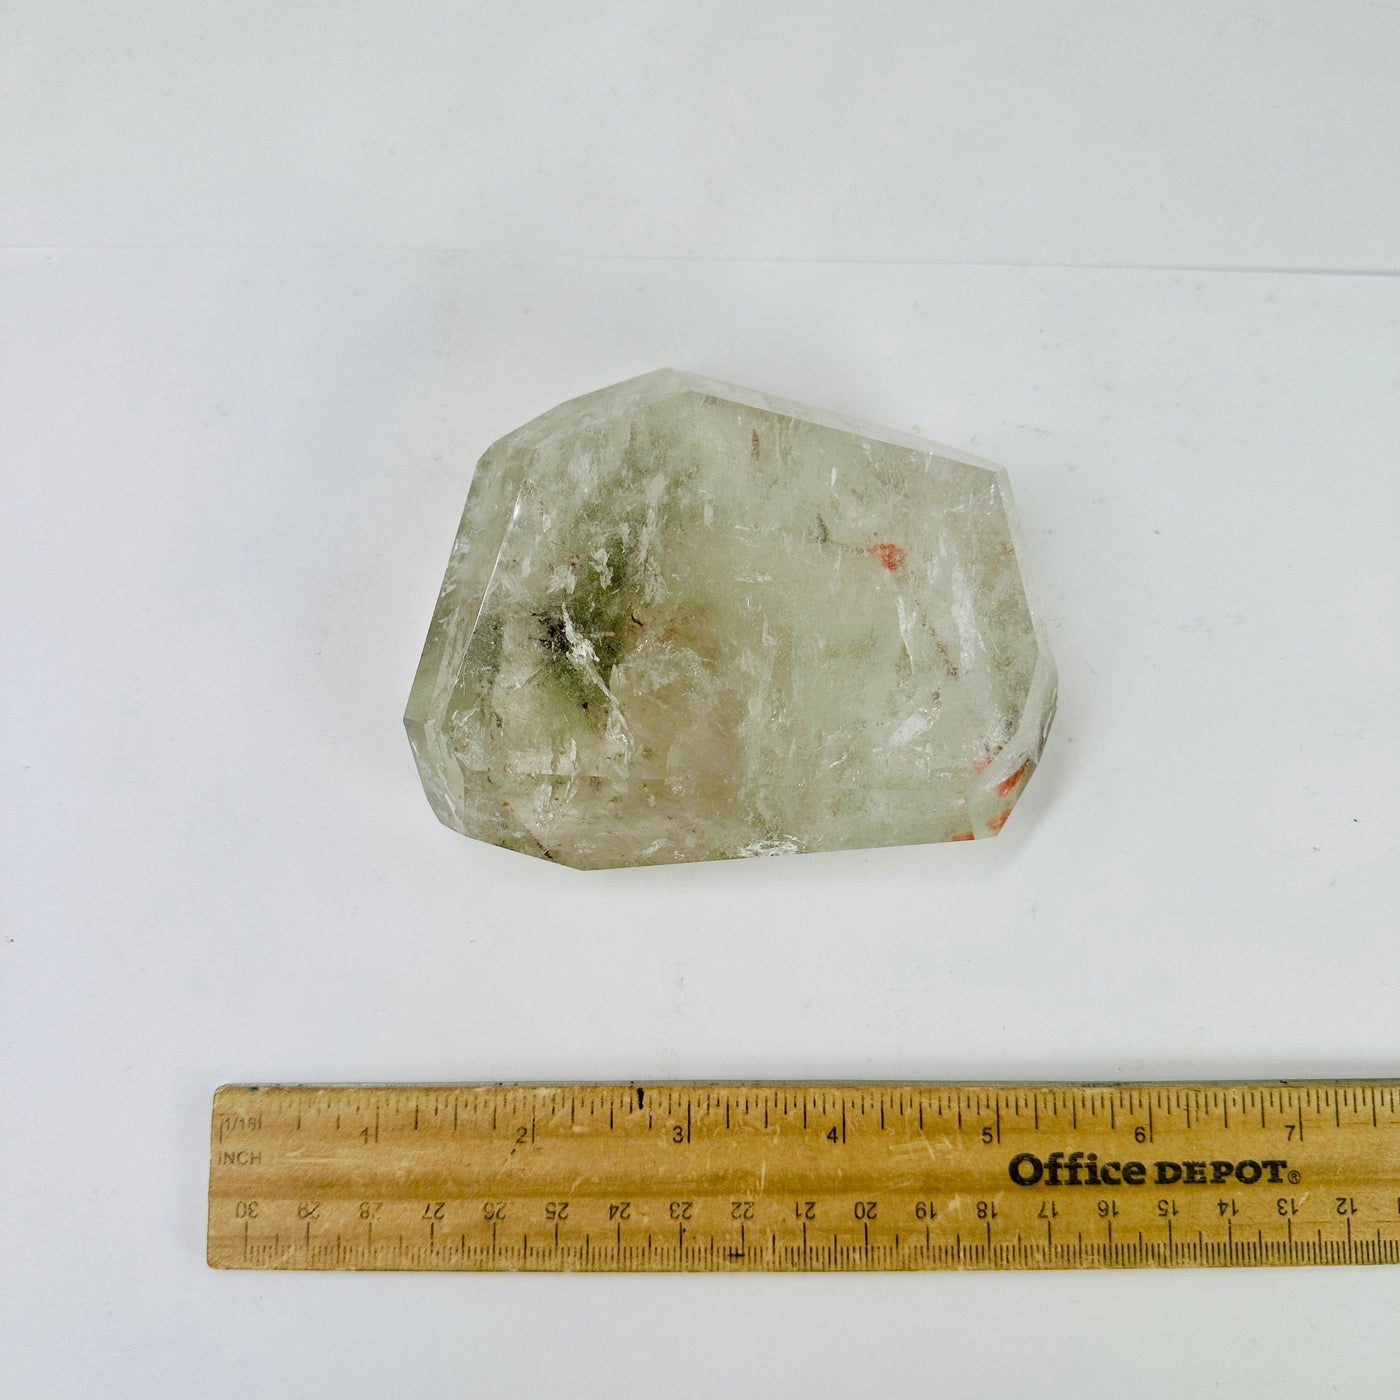 Polished Crystal Quartz Freeform with Inclusions top view with ruler for size reference